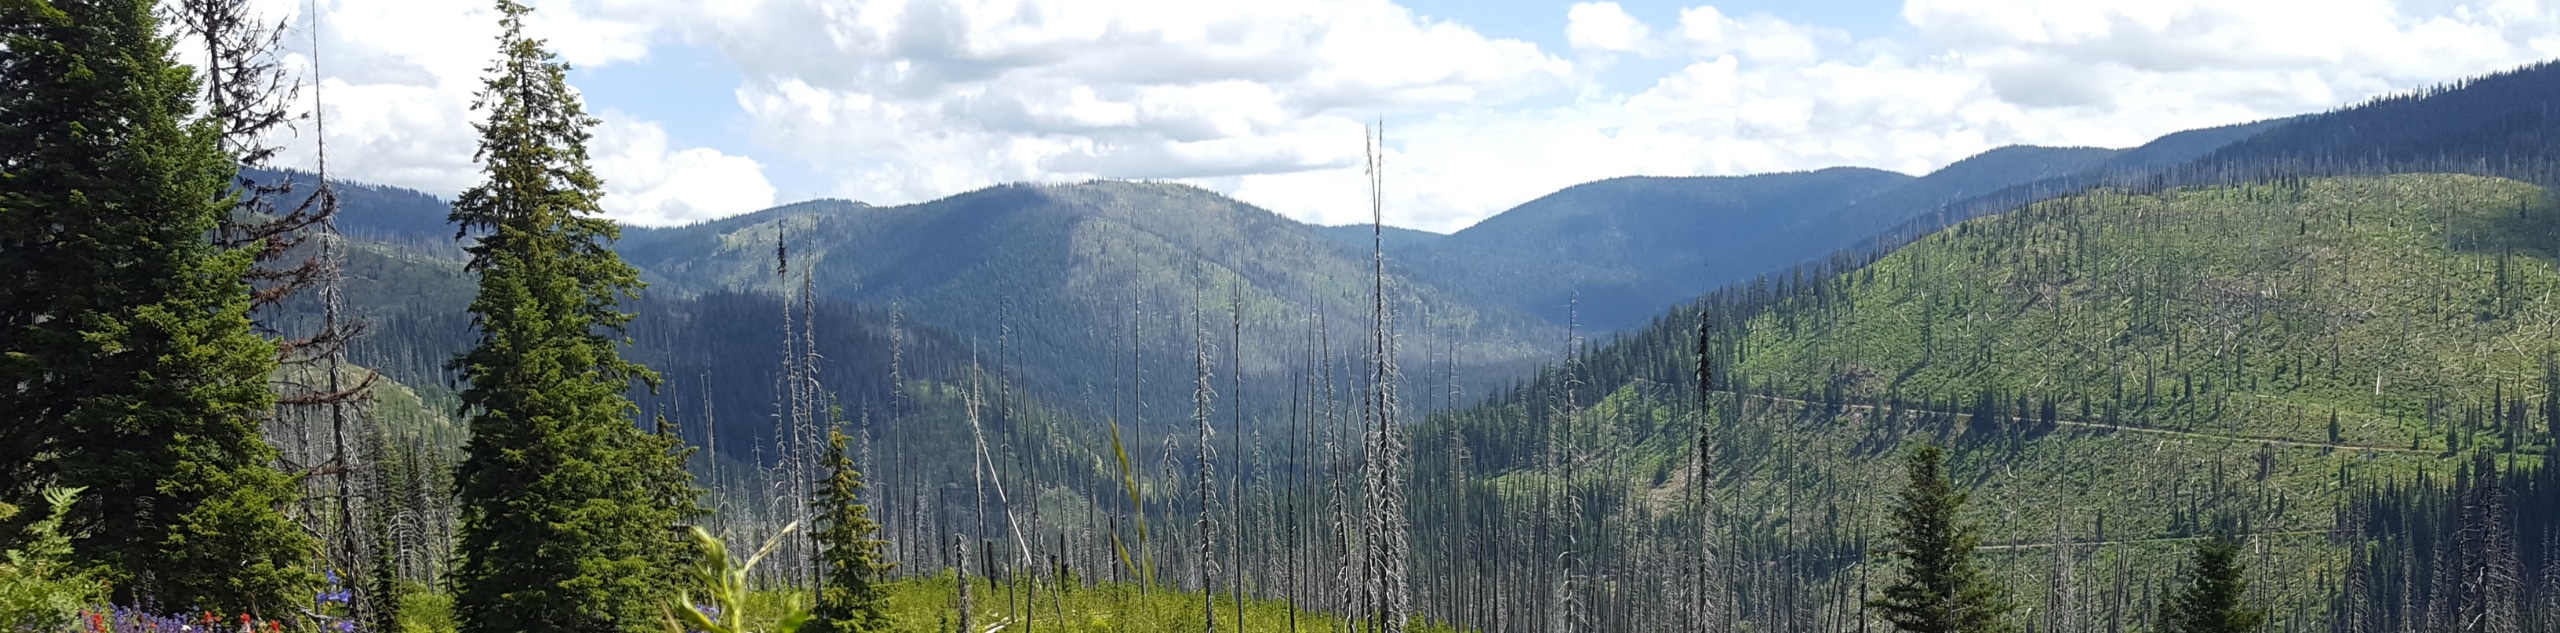 Nez Perce-Clearwater National Forests